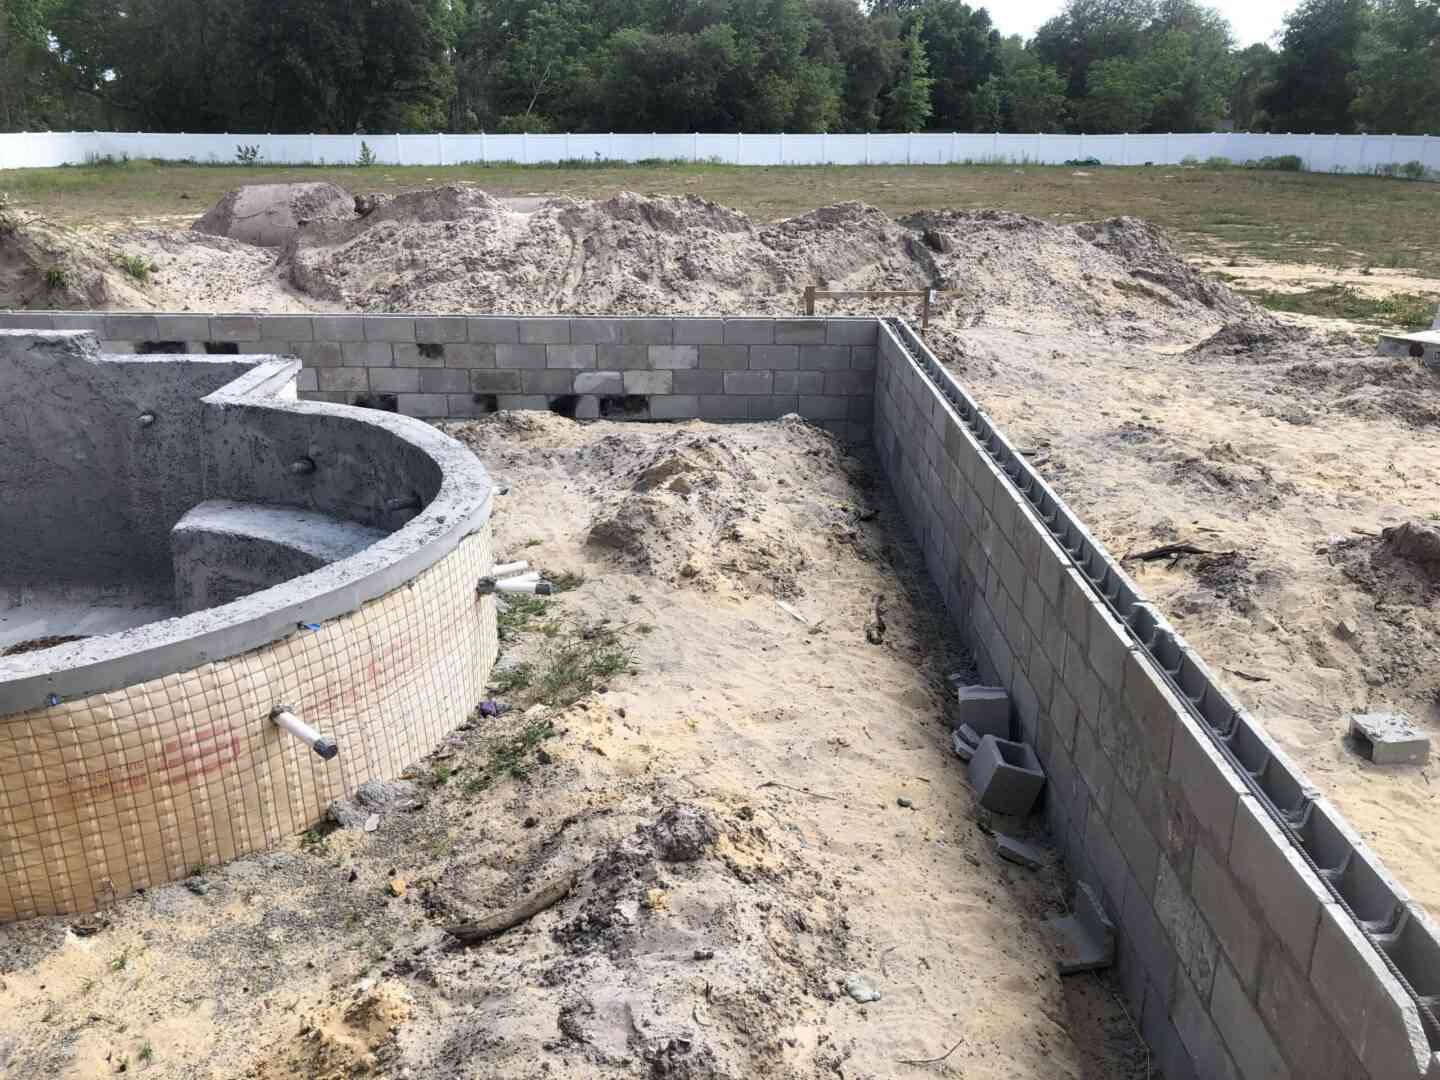 Multi-layered pool being constructed